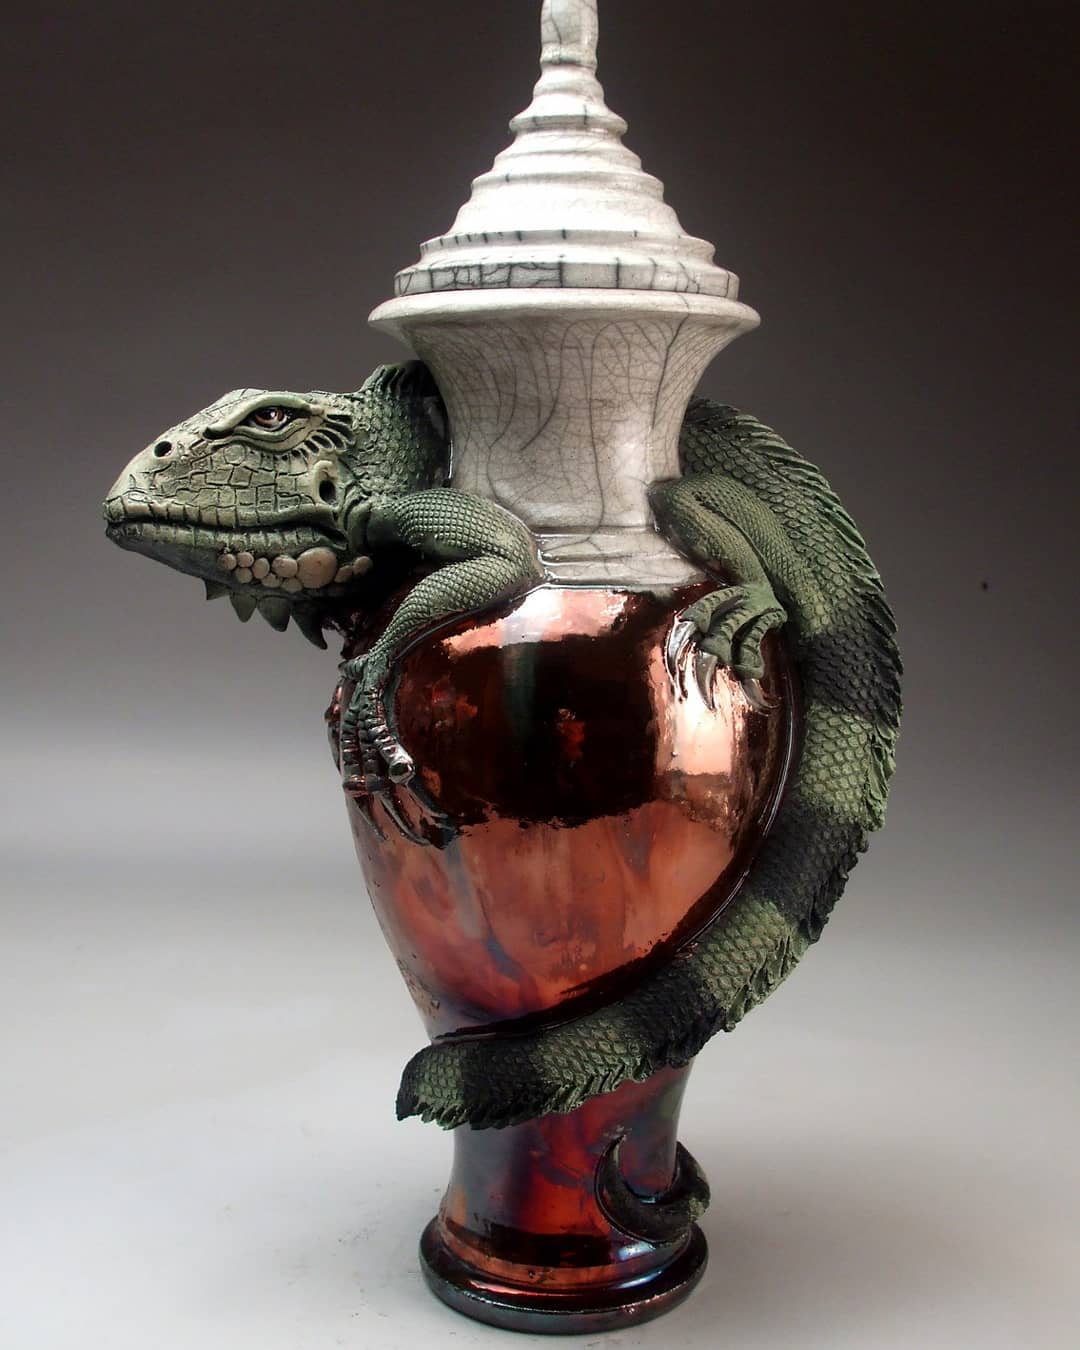 Ceramic Fairytales, Intricate Sculptures, Teapots, And Mugs By Mitchell Grafton (25)